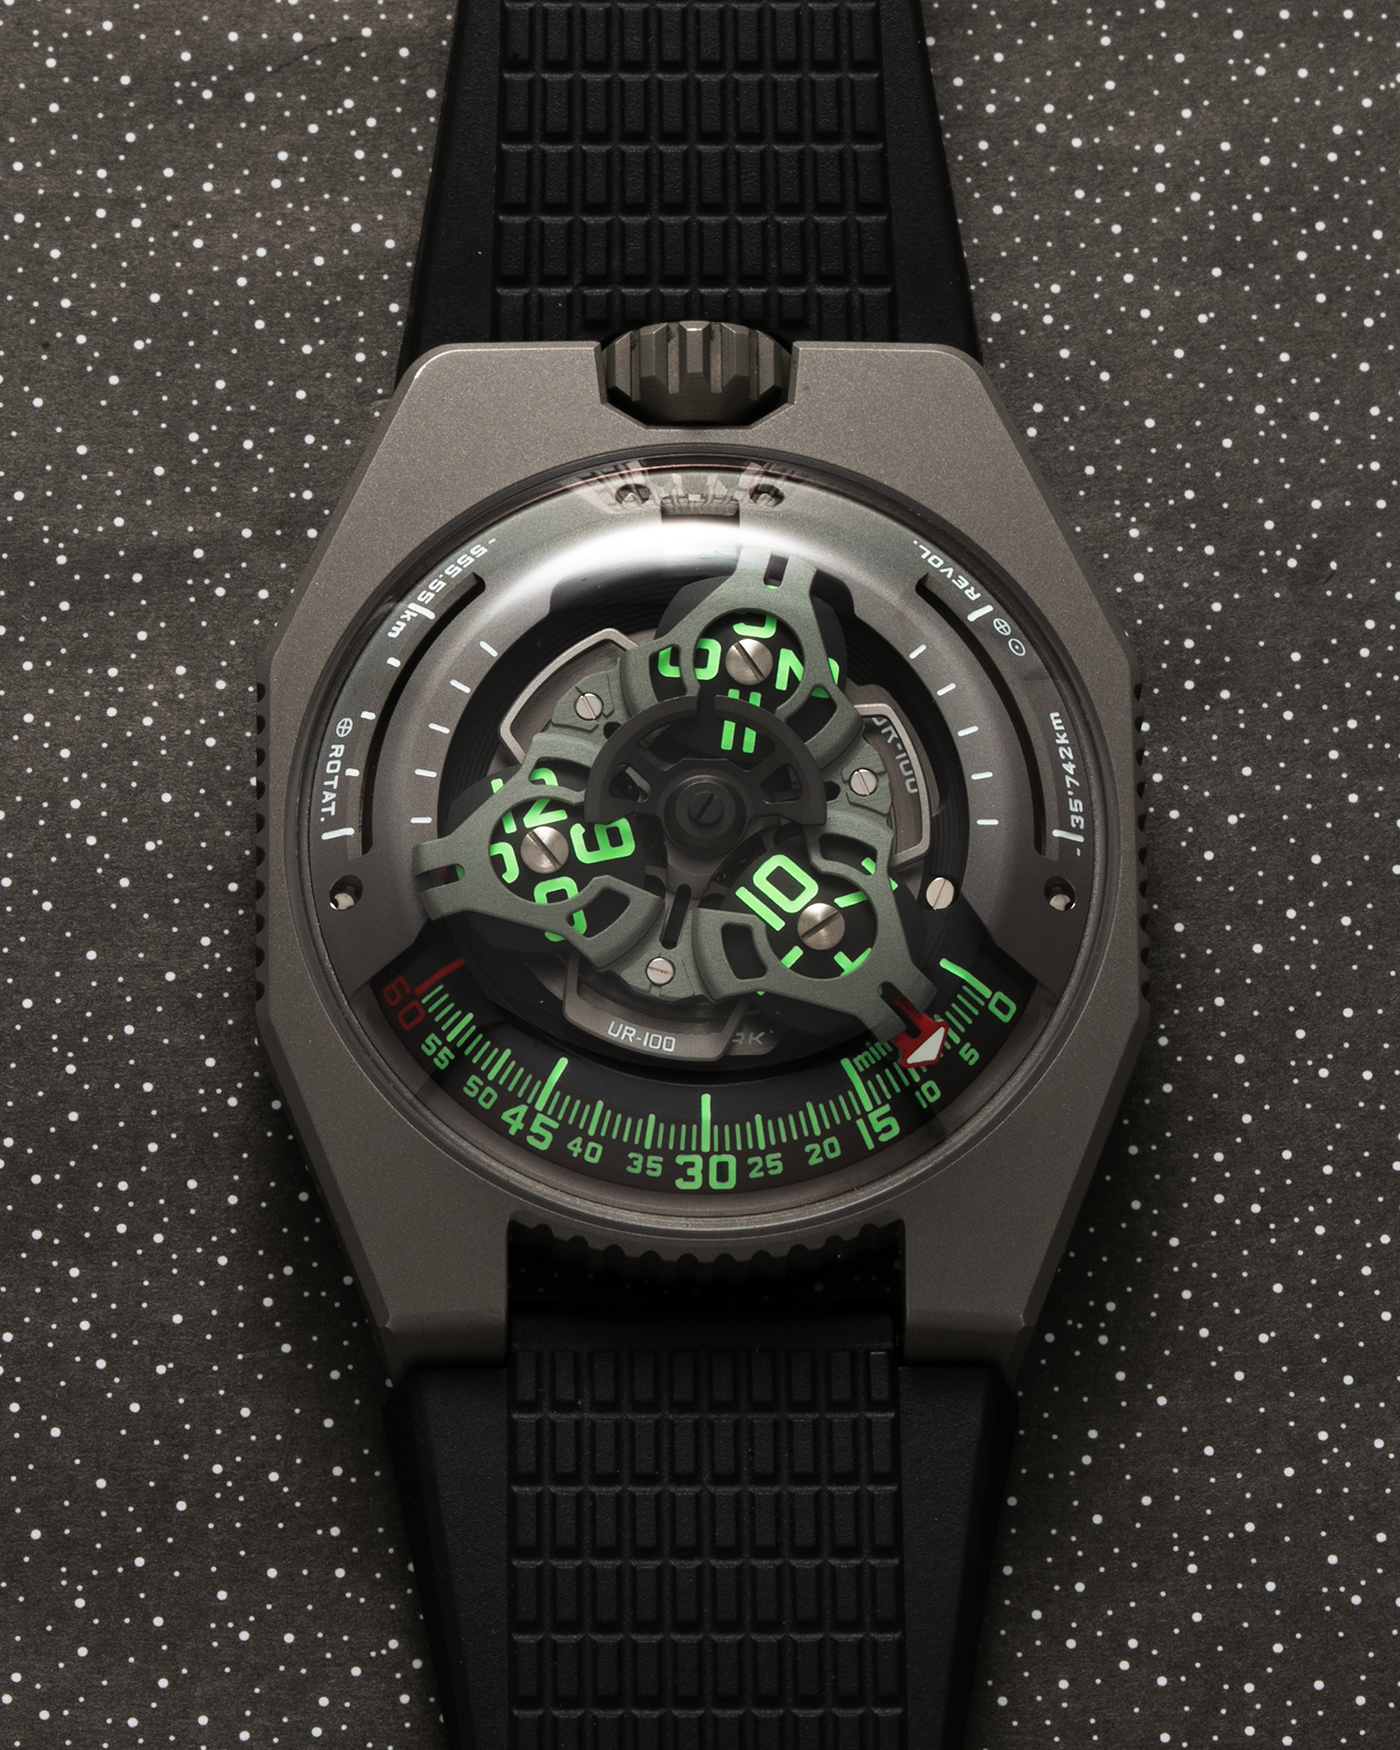 Brand: Urwerk Year: 2020 Model: UR100 GunMetal, Limited Edition of 25 Pieces Material: Titanium and Stainless-Steel Case with GunMetal PVD-Coating, ARCAP Alloy (Blend of Nickle, Copper, Cobalt and Zinc) Movement Carousell System Movement: Urwerk Cal. 12.01, Self-Winding Case Dimensions: 41mm x 14mm Strap: Urwerk Proprietary Black Rubber Strap with Signed Deployant Buckle, with additional Urwerk Proprietary Black Textile Strap